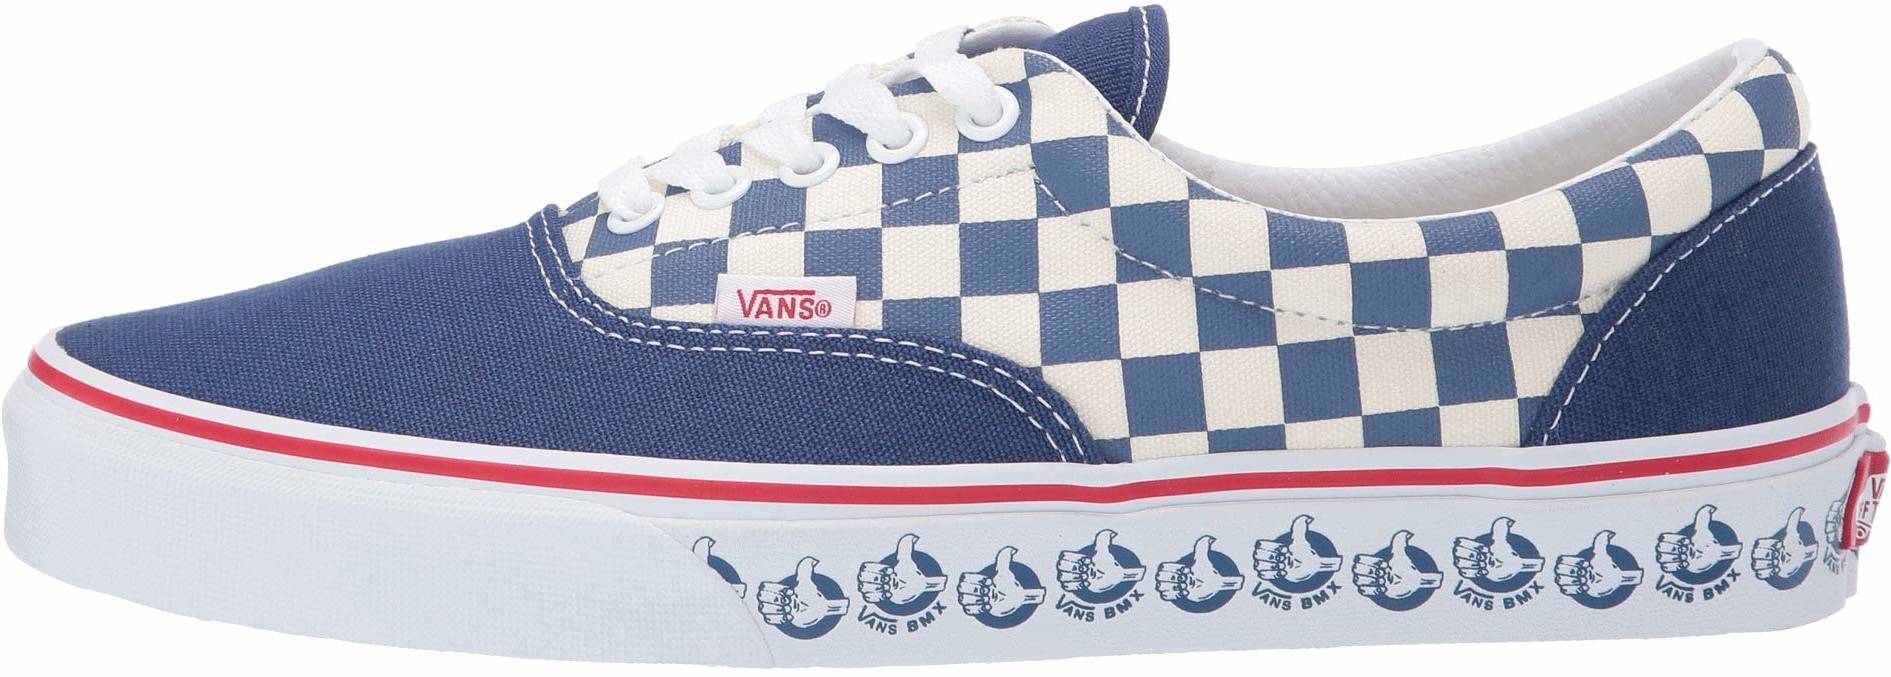 blue and white vans shoes